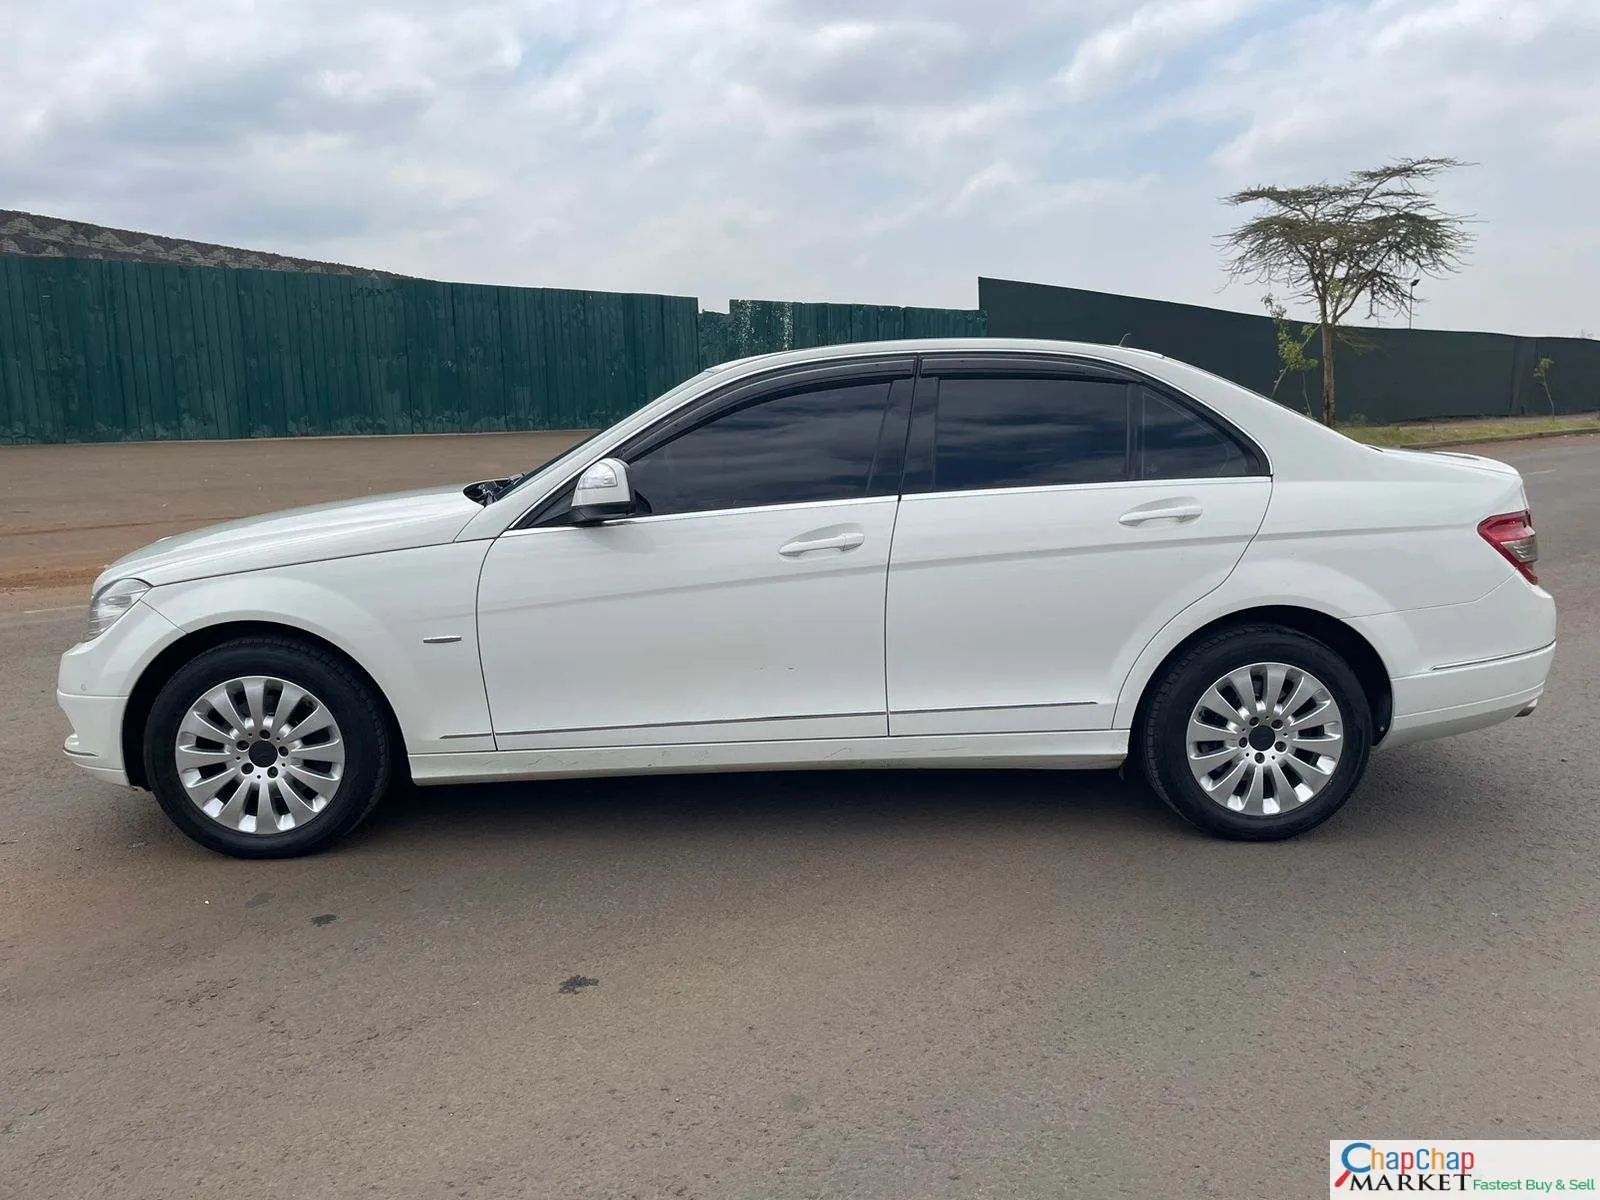 Cars Cars For Sale-Mercedes Benz C200 for sale in Kenya 🔥 You Pay 30% DEPOSIT Trade in OK EXCLUSIVE Hire Purchase Installments bank finance ok 9